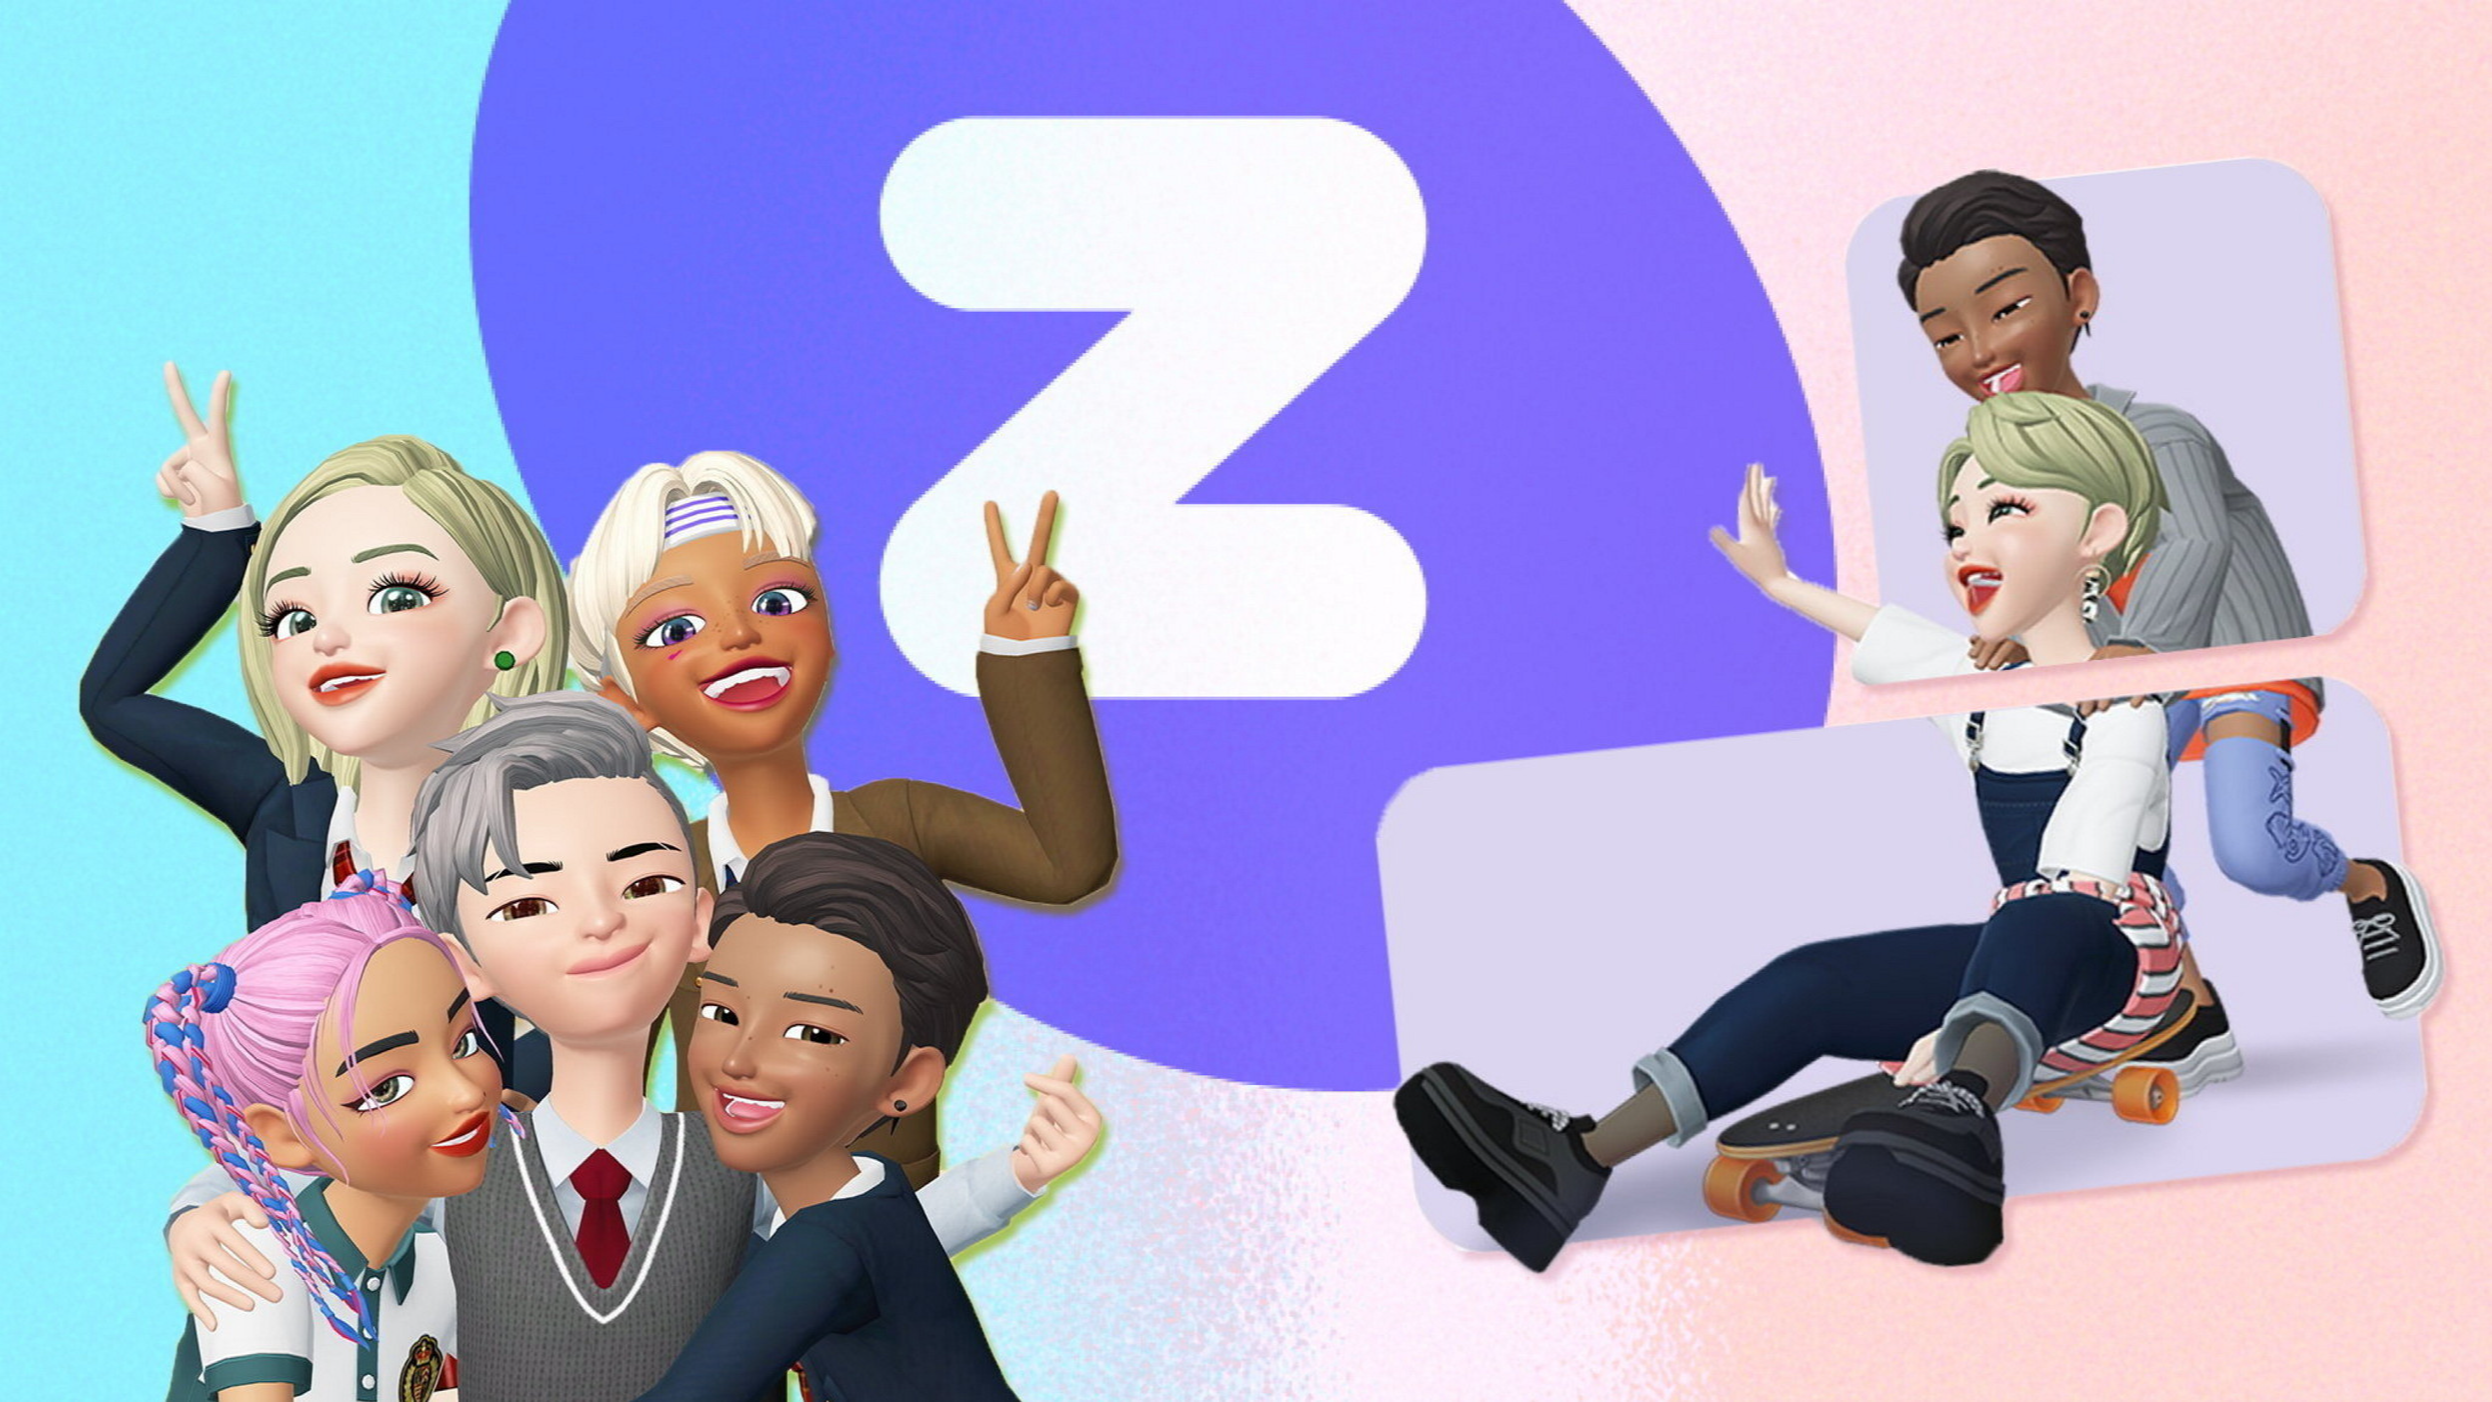 How to customize your avatar in Zepeto